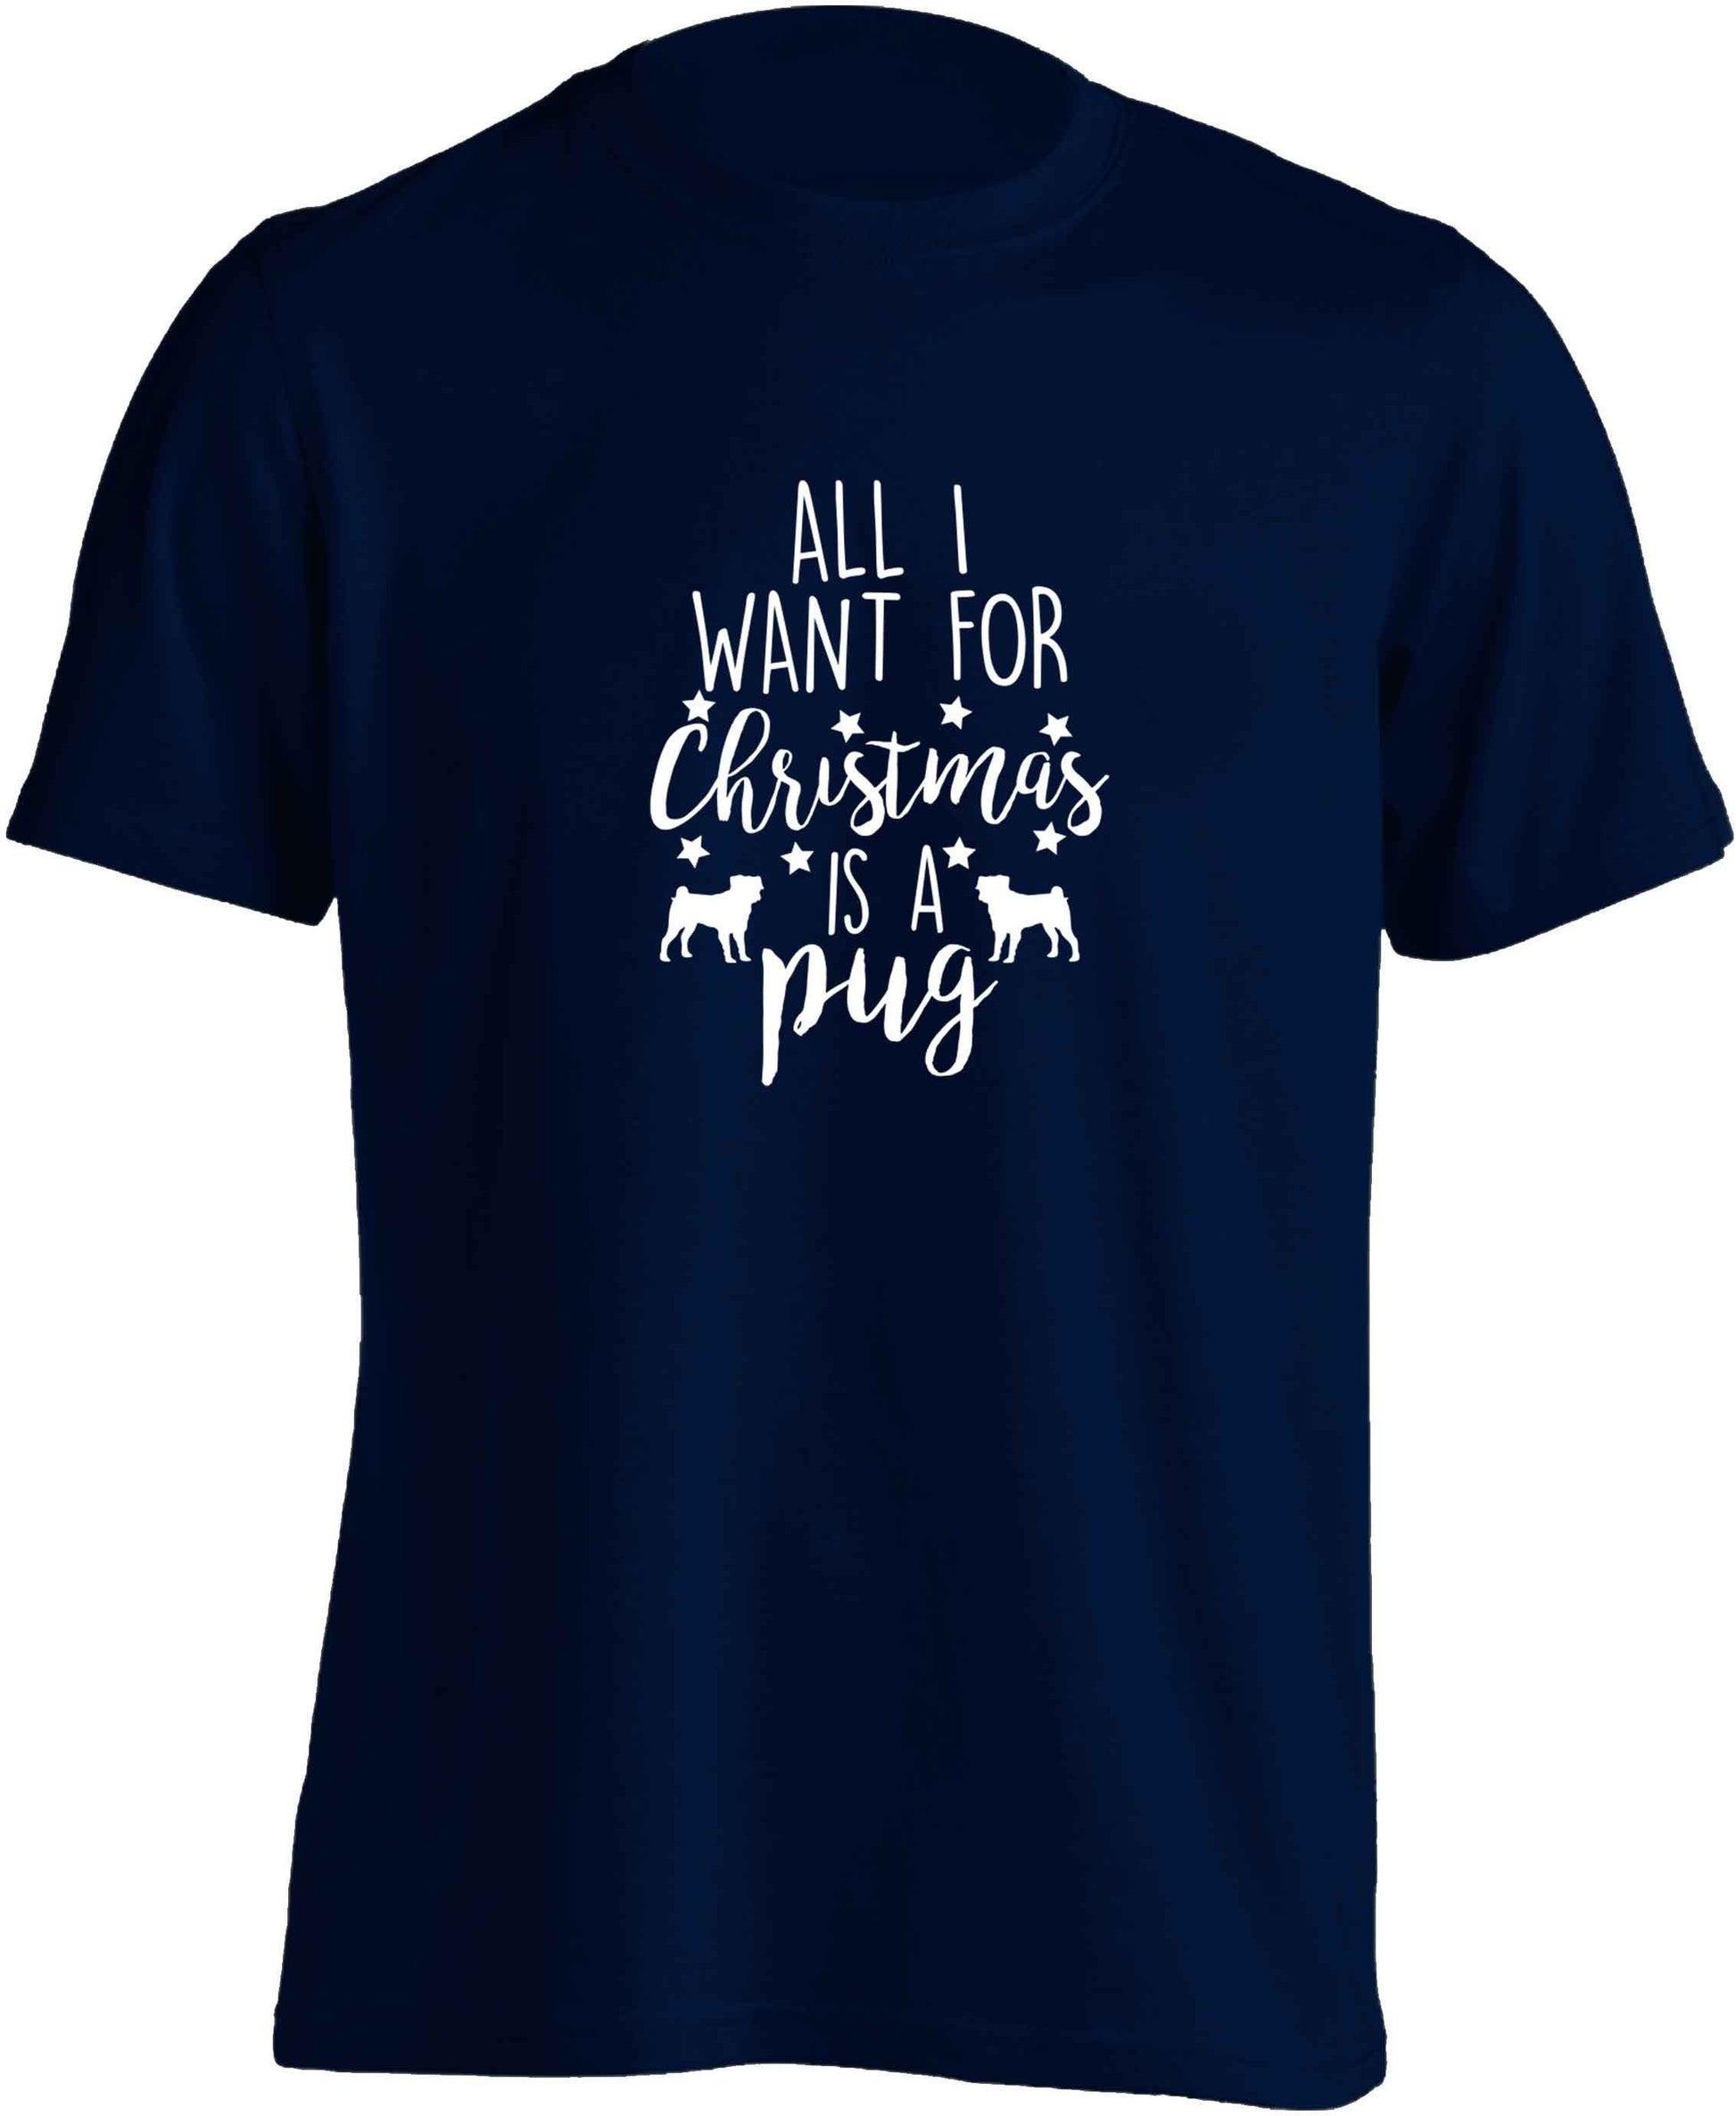 All I want for Christmas is a pug adults unisex navy Tshirt 2XL